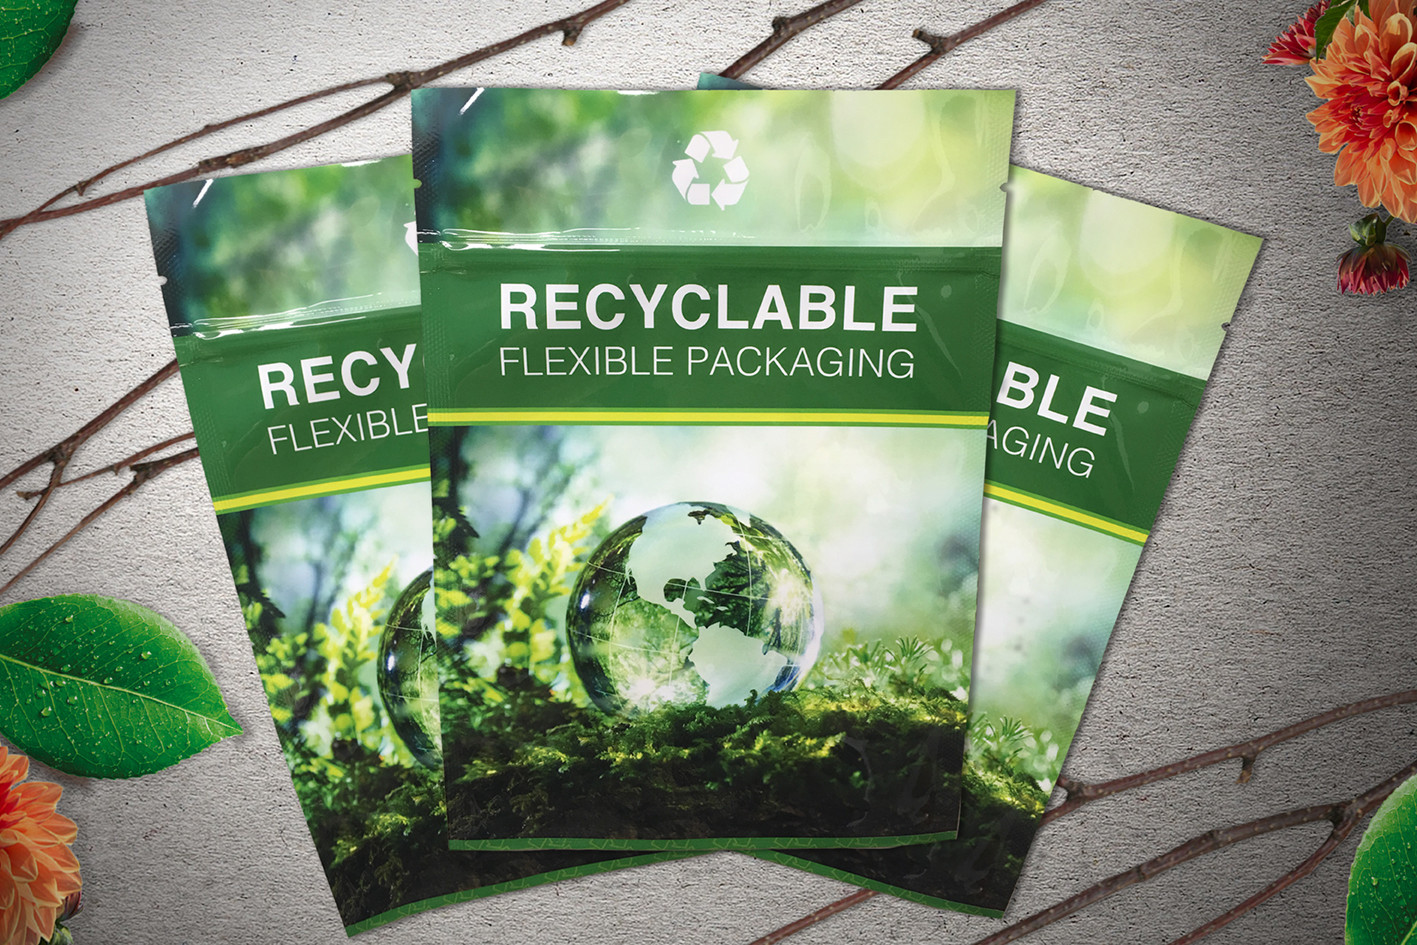 Recyclable Flexible Packaging